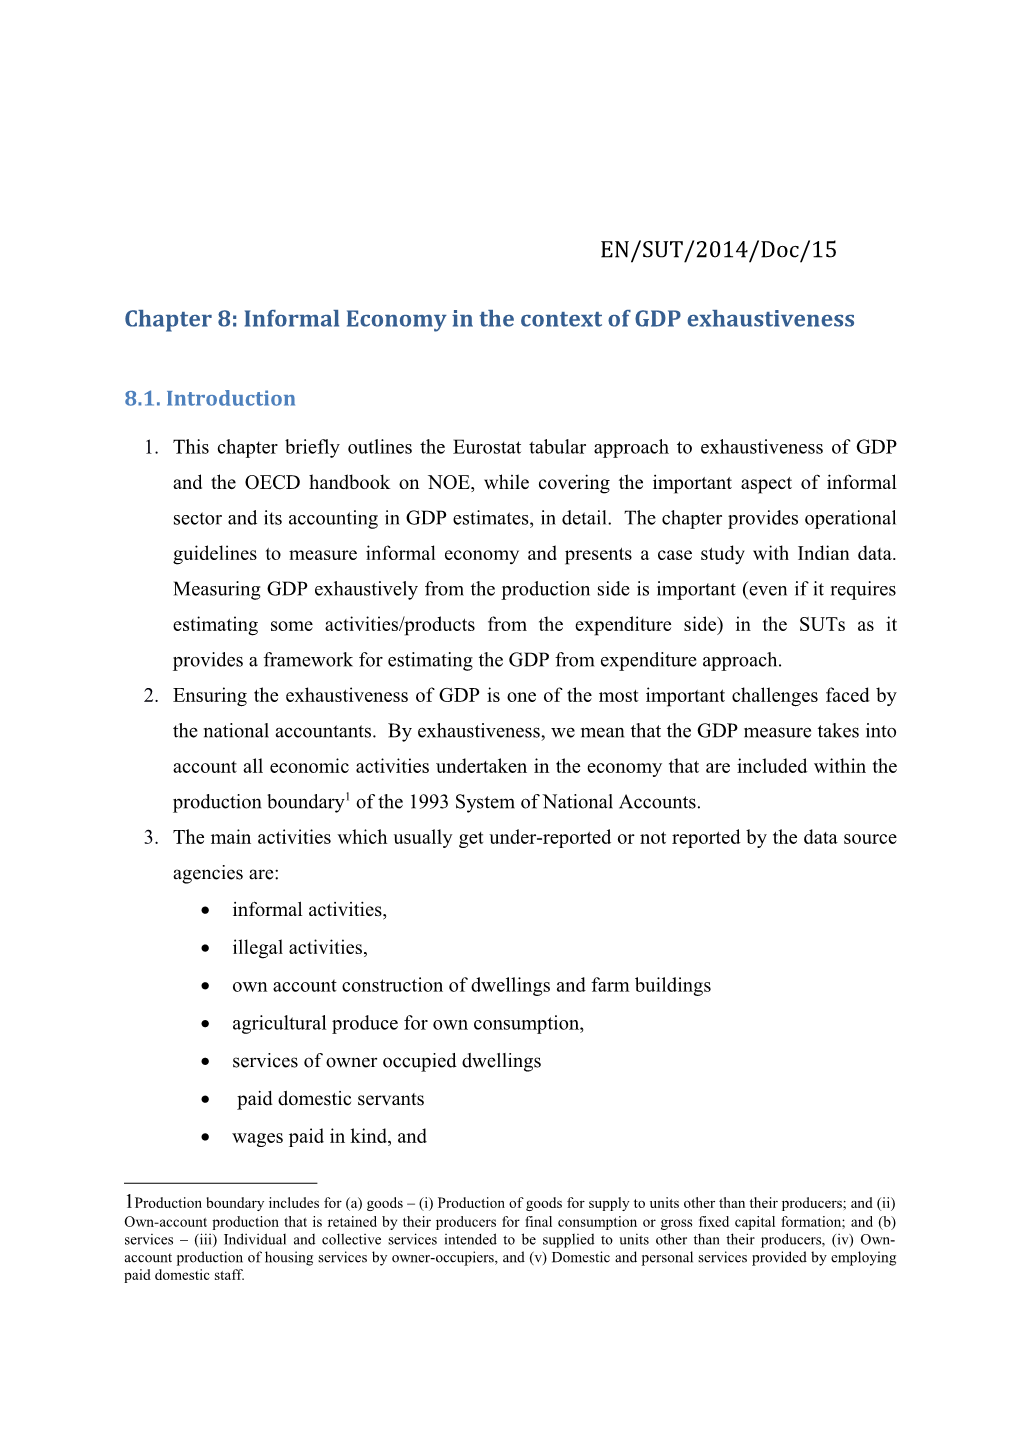 Chapter 8: Informal Economy in the Context of GDP Exhaustiveness